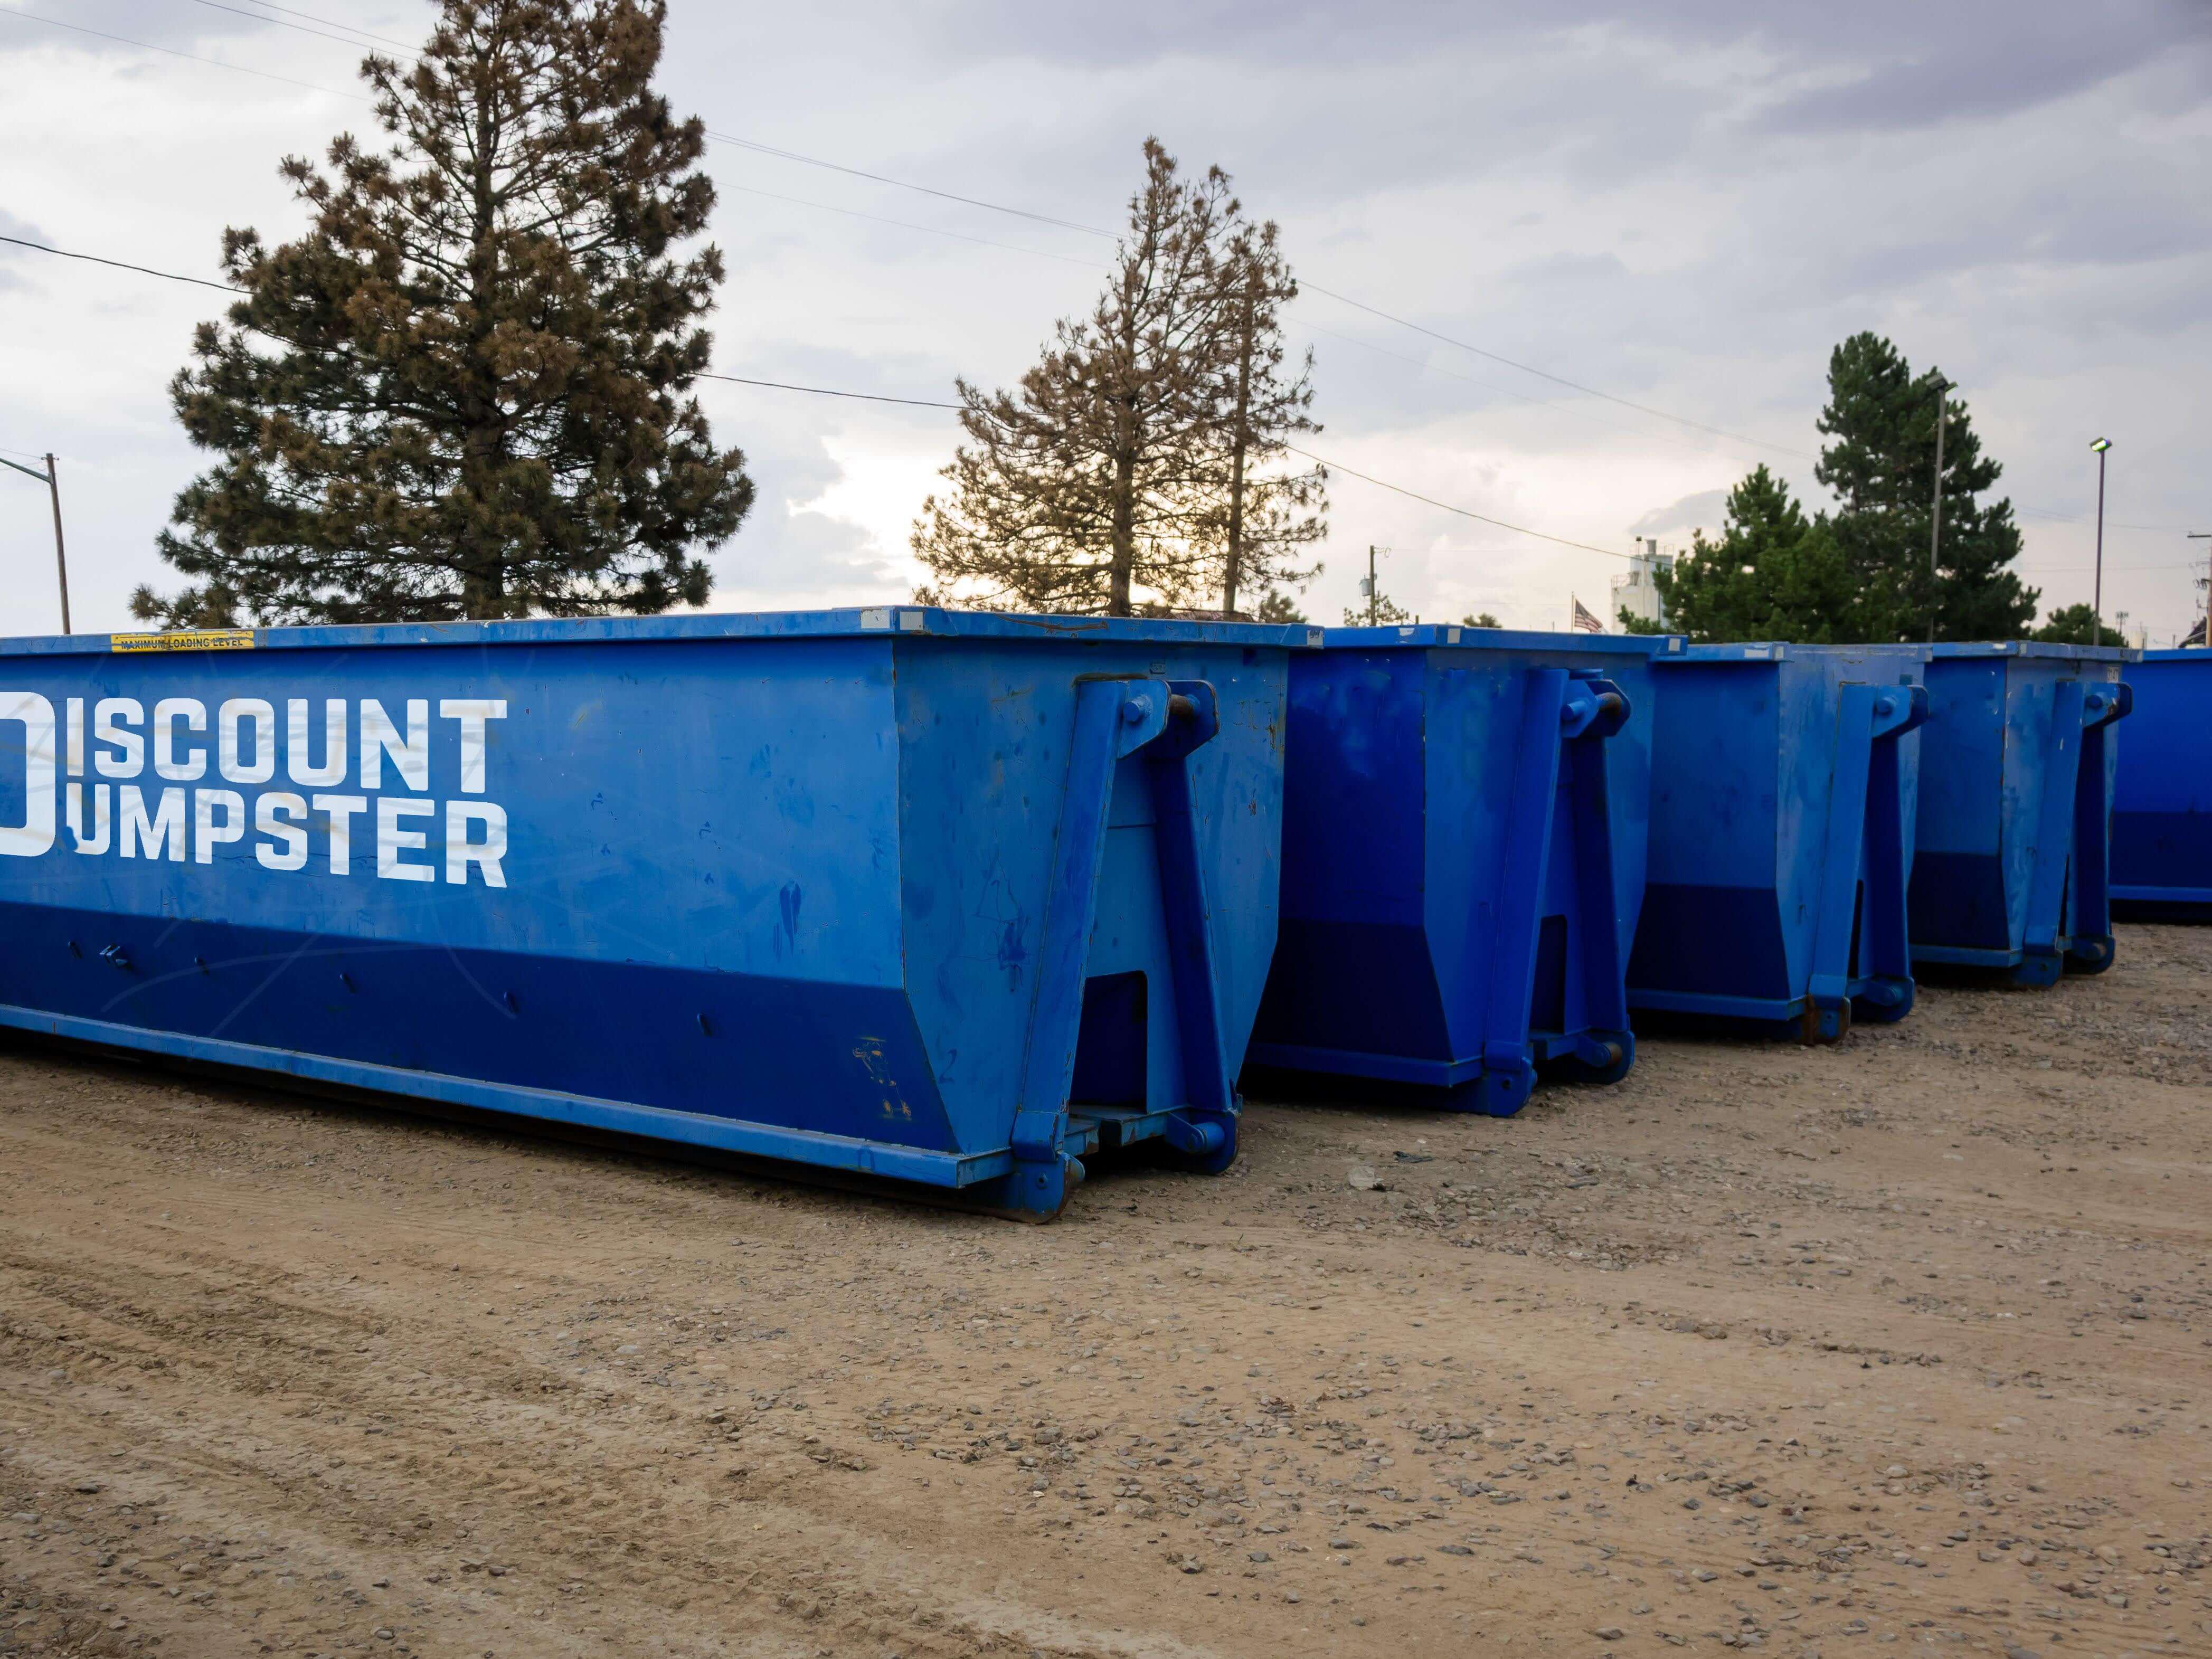 Discount dumpster is proud to serve the chicago il area Discount Dumpster Chicago (312)549-9198